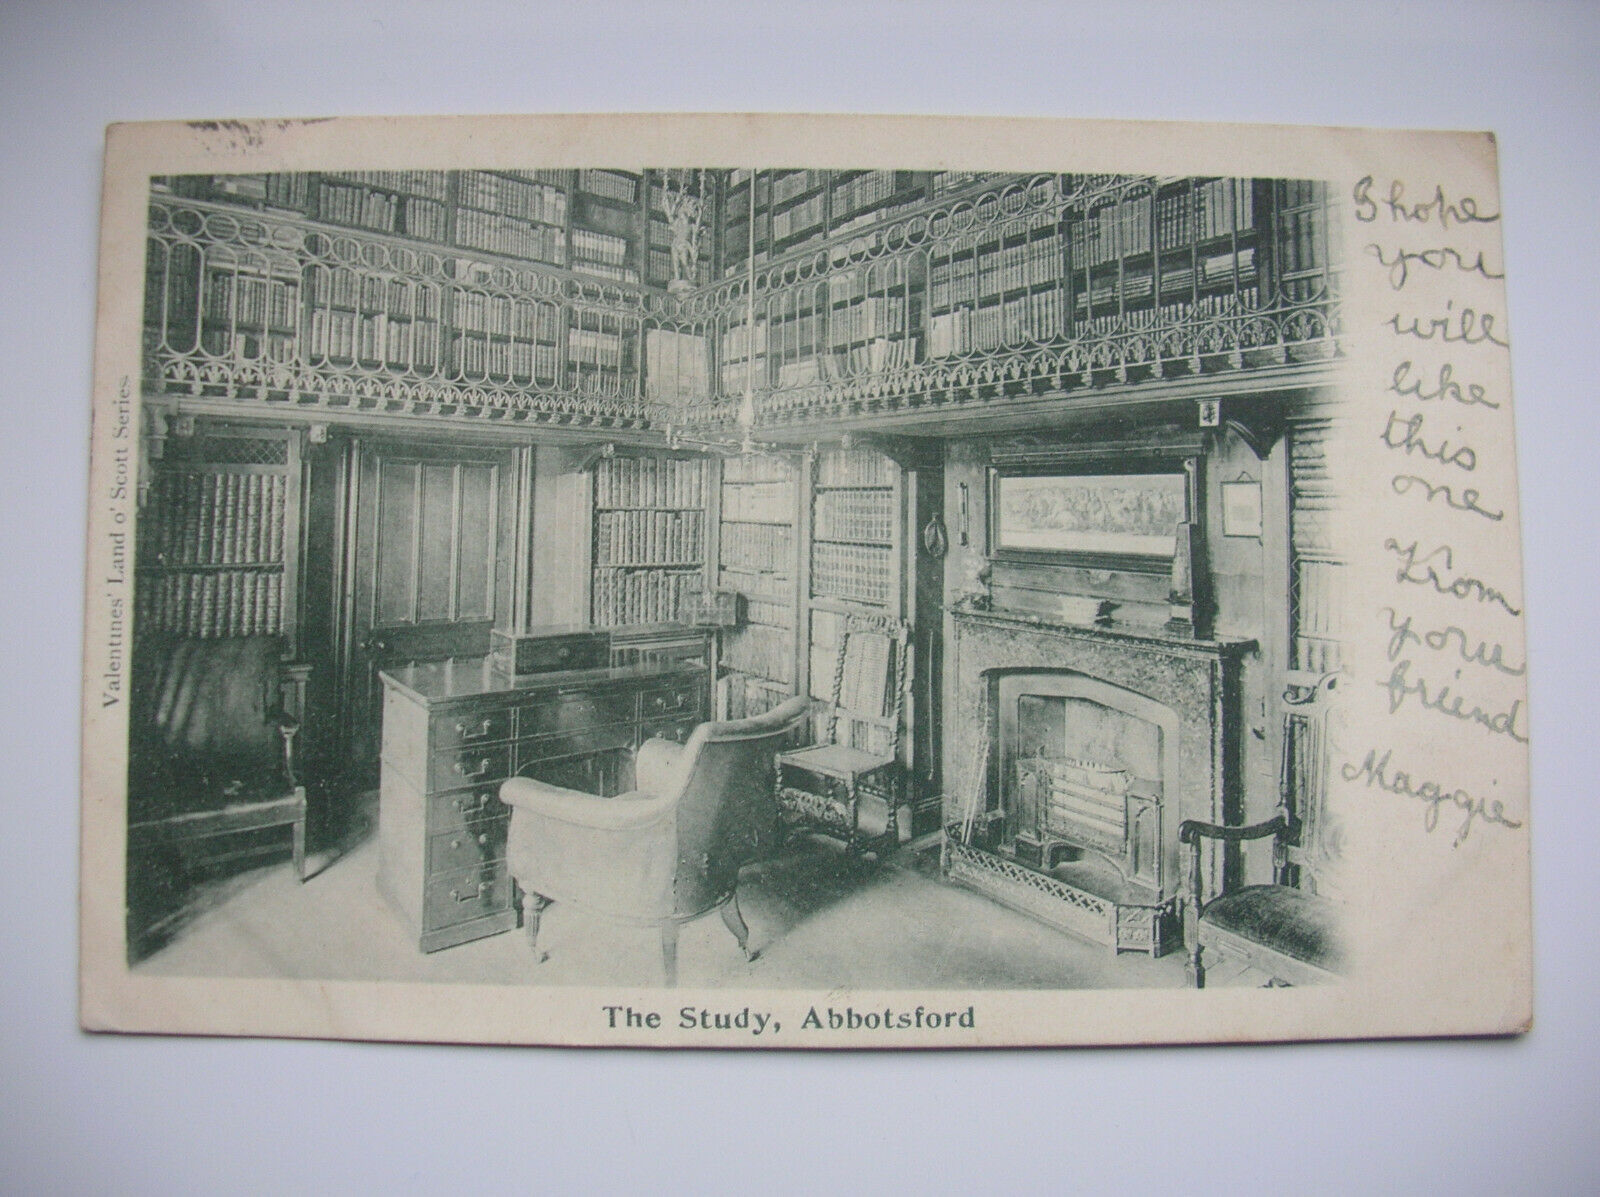 House Clearance - Abbotsford, The Study – Sir Walter Scott.  (1902 - Valentine)